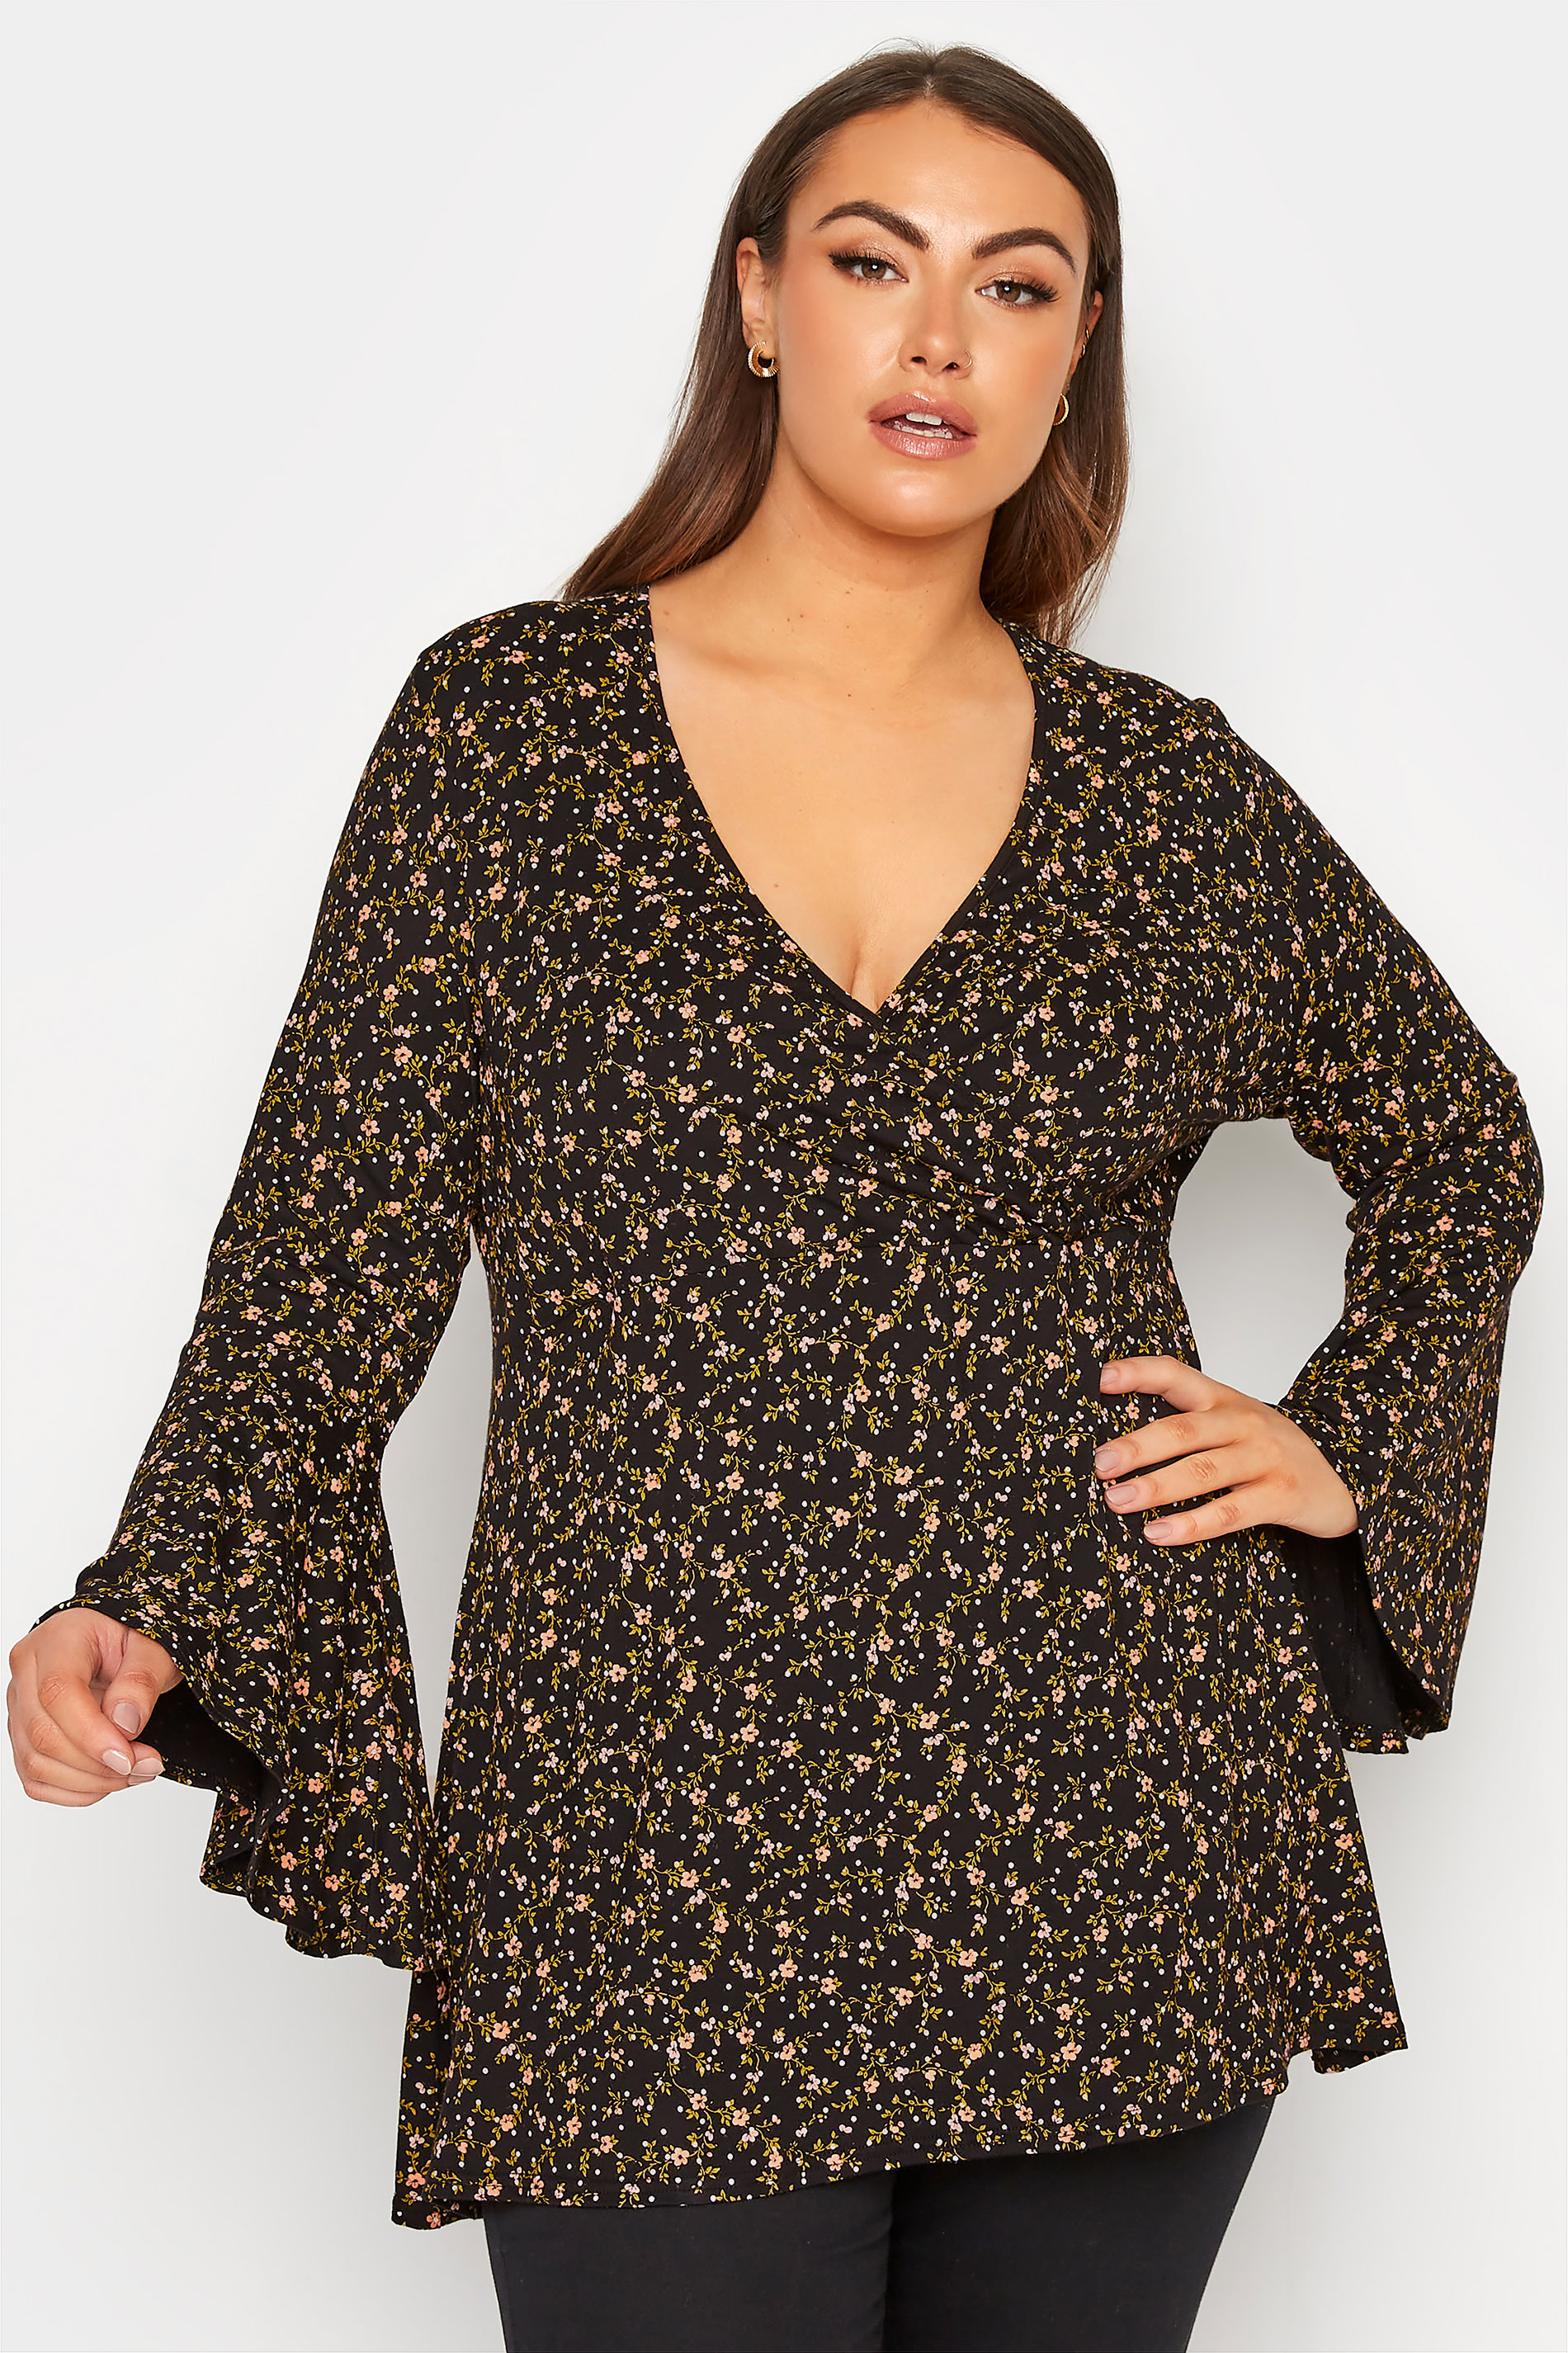 LIMITED COLLECTION Curve Black Ditsy Floral Flare Sleeve Wrap Top_A.jpg